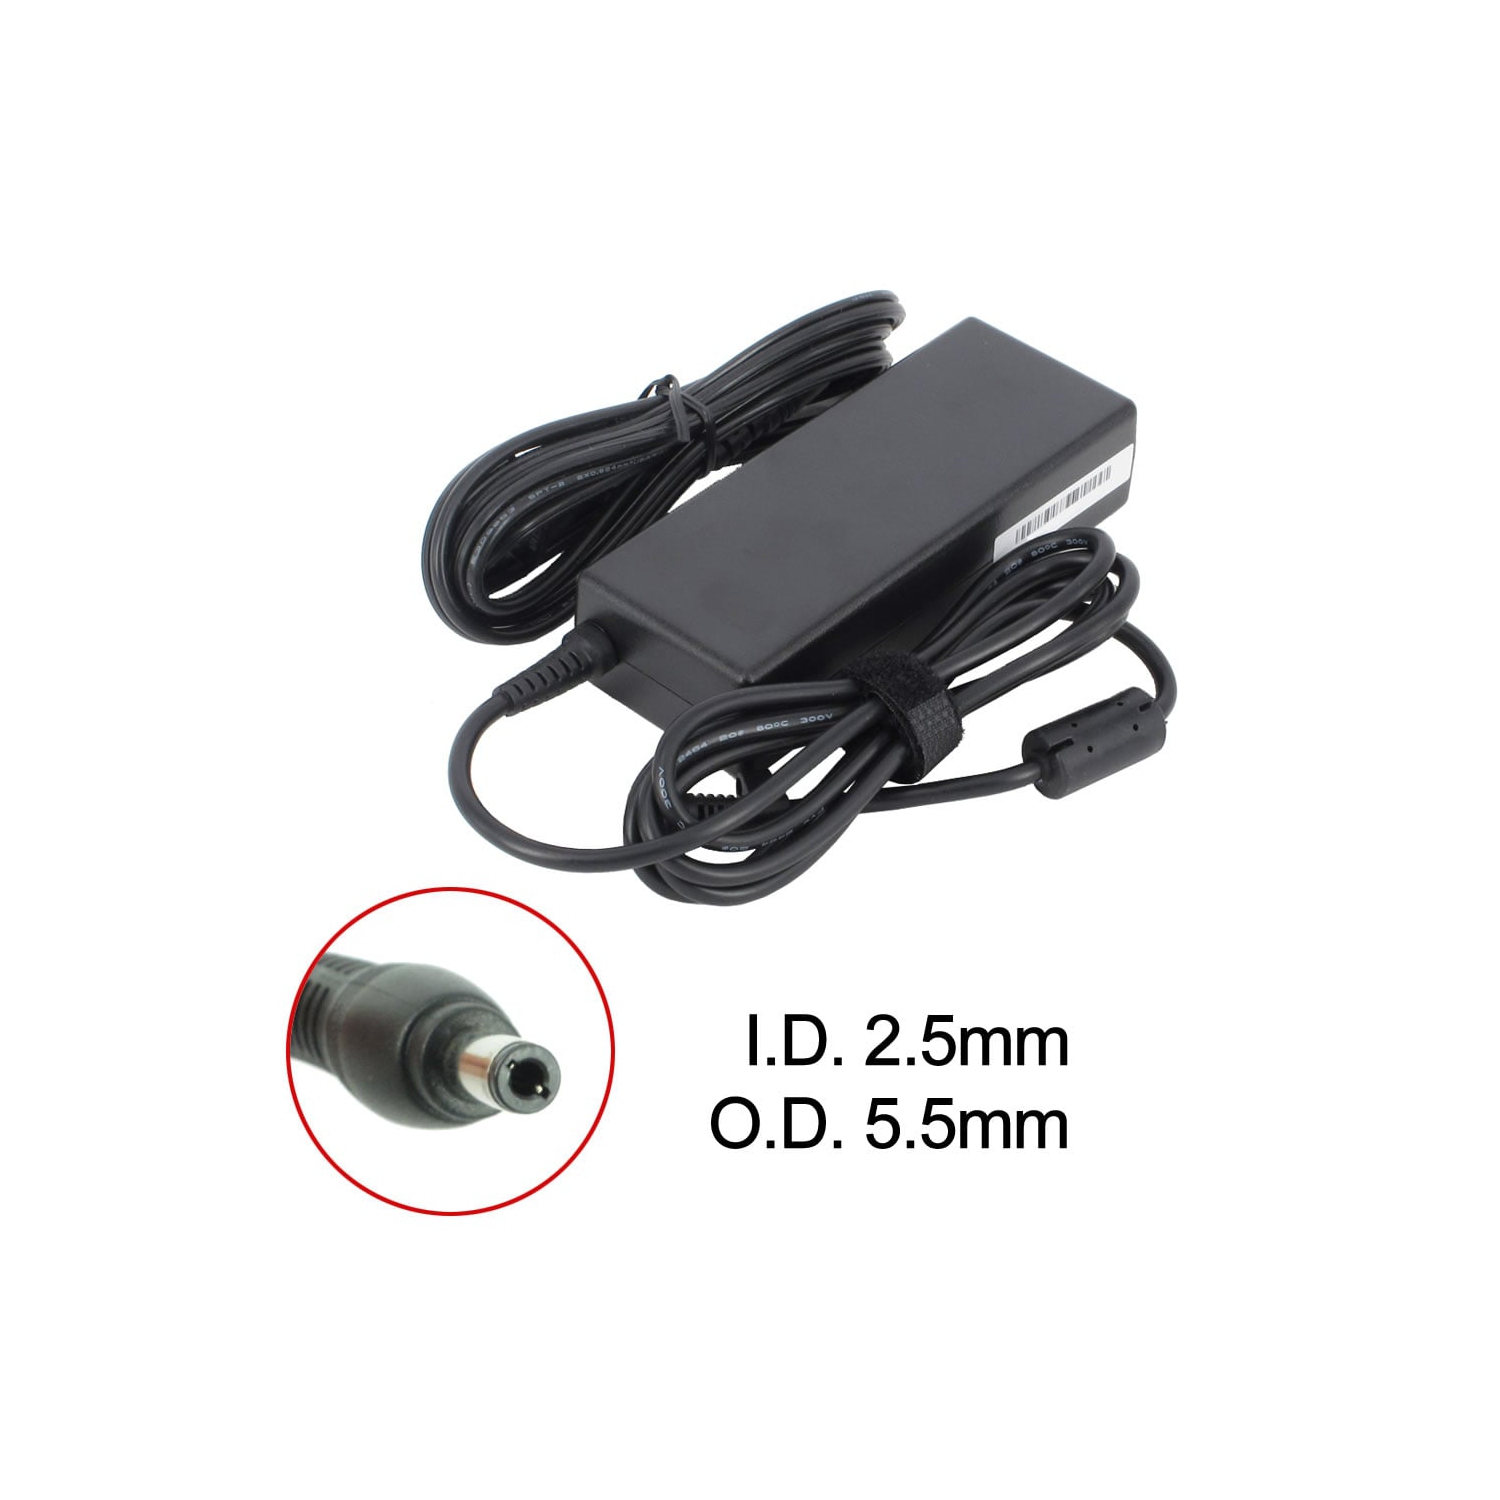 BATTDEPOT New Laptop AC Adapter for NEC LL500/5D 103942 808-875692-010A 9T458 ADP-65 HB BBEF PA-1900-36 SA80-3115